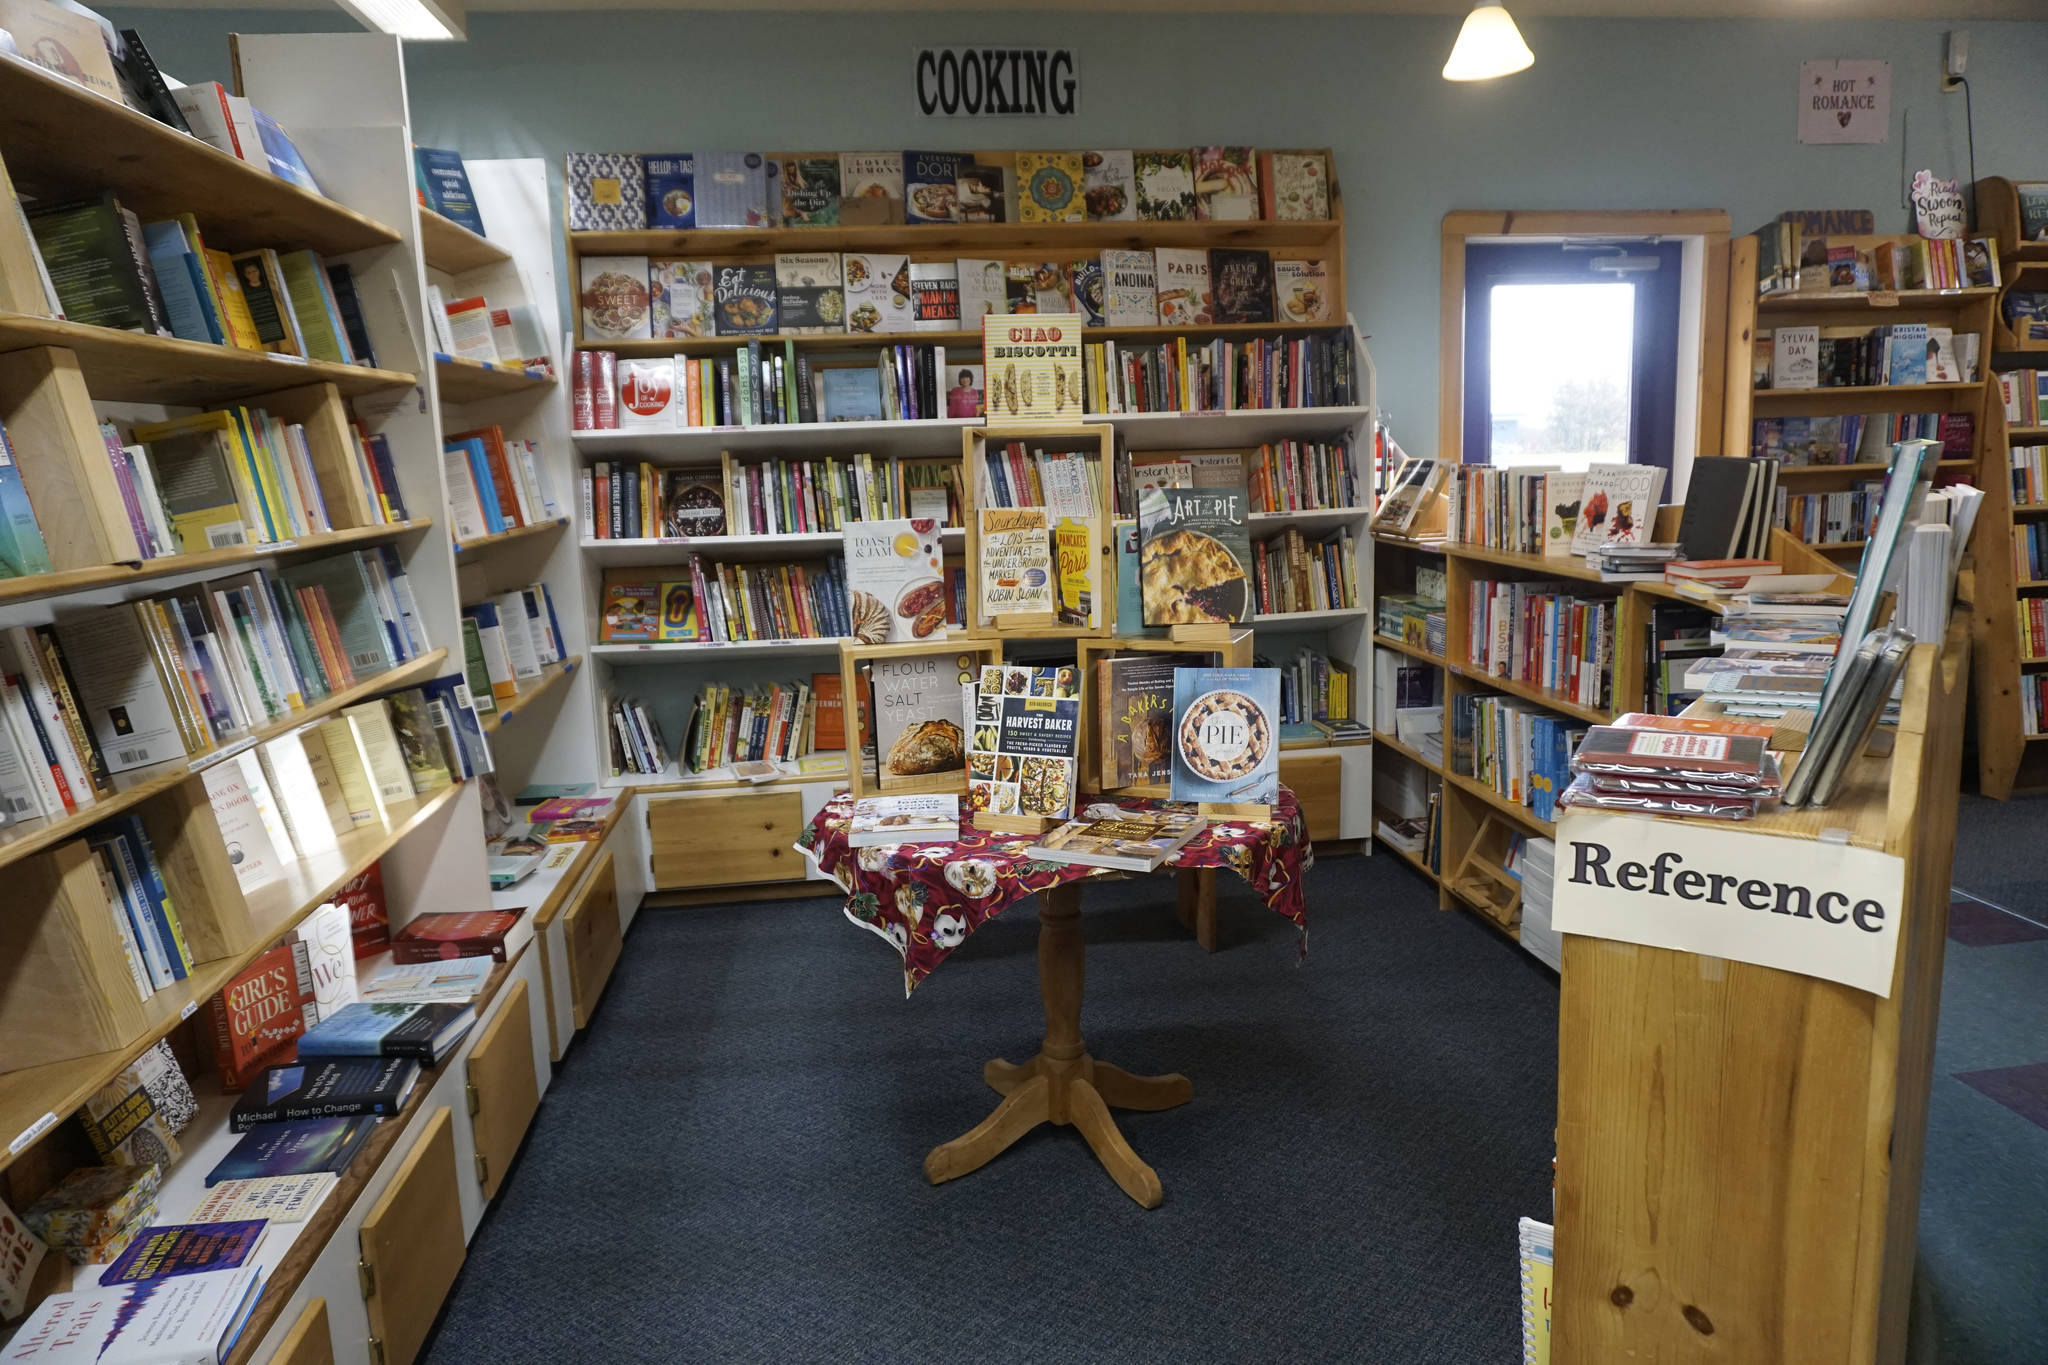 The cooking and reference section at the Homer Bookstore on Oct. 29, 2018, in Homer, Alaska. (Photo by Michael Armstrong/Homer News)